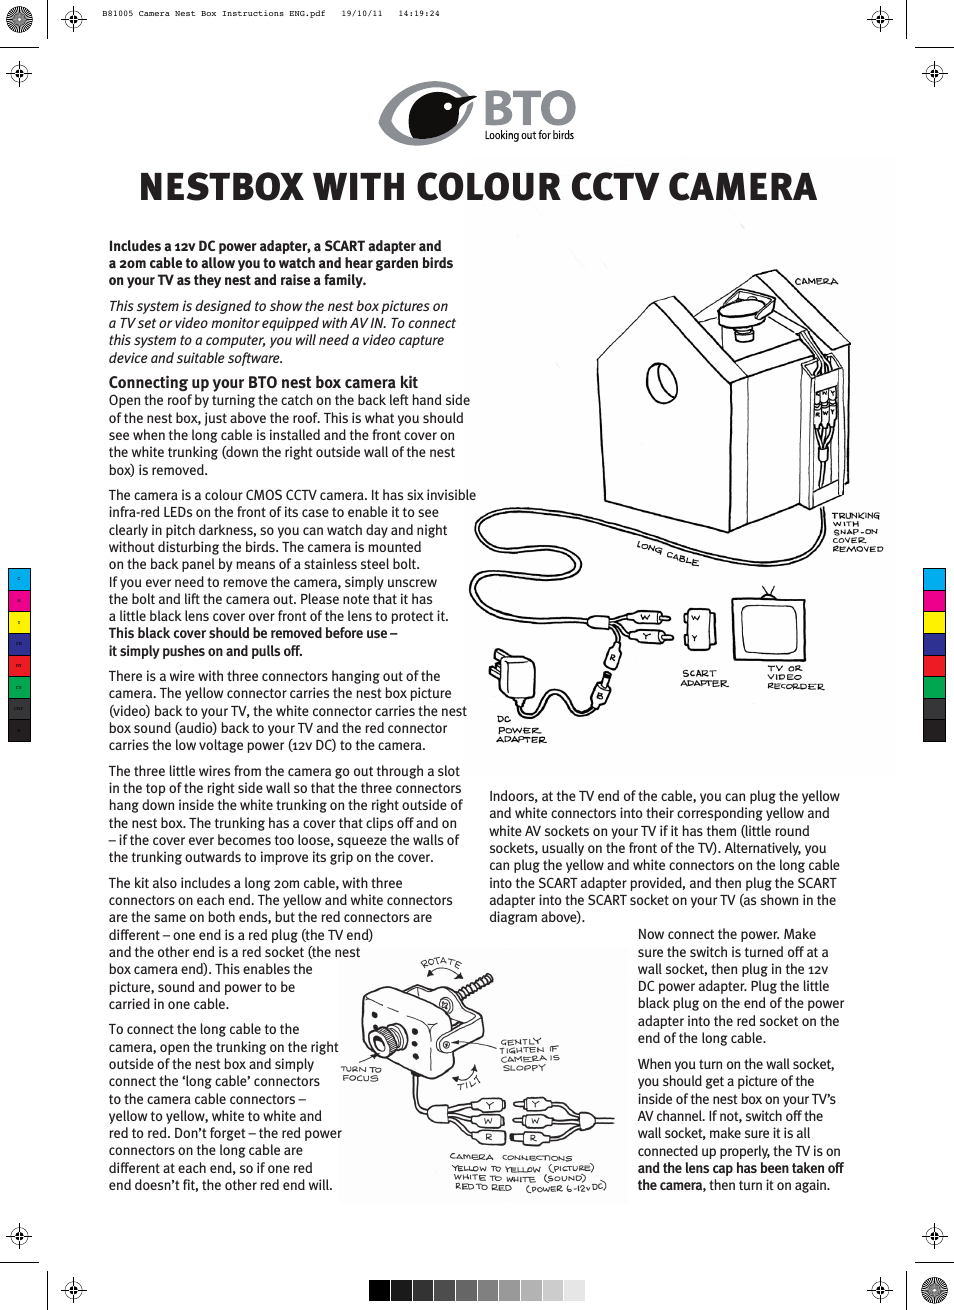 Nestbox With Color CCTV Camera